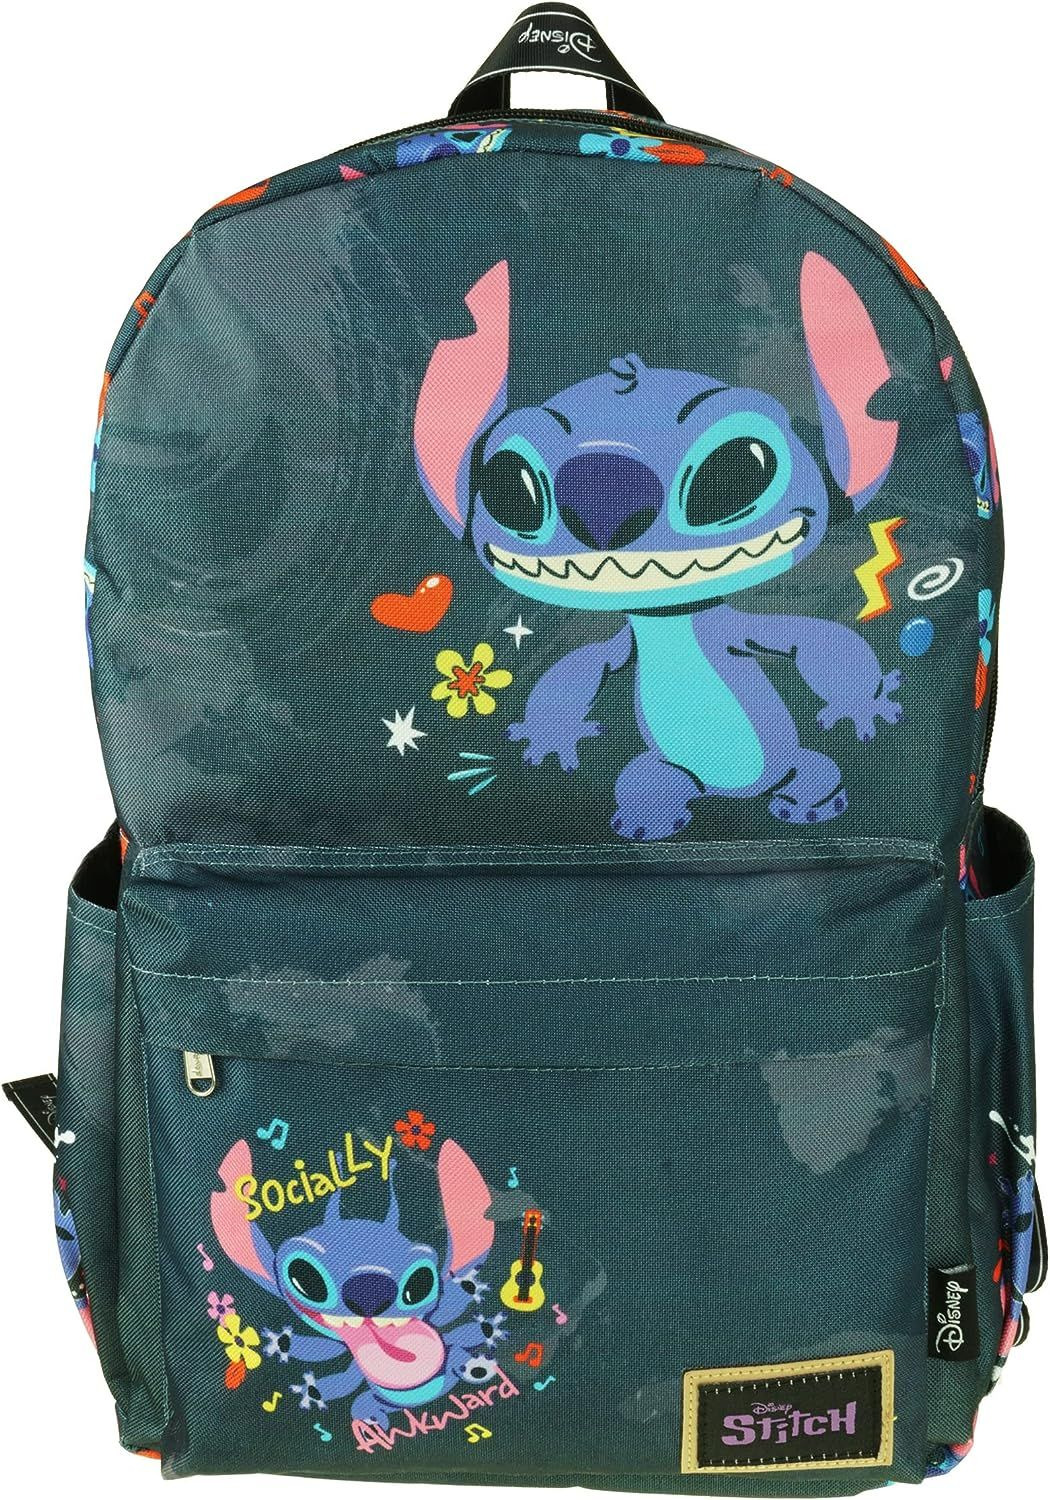 KBNL Classic Disney Lilo & Stitch Backpack with Laptop Compartment for... 